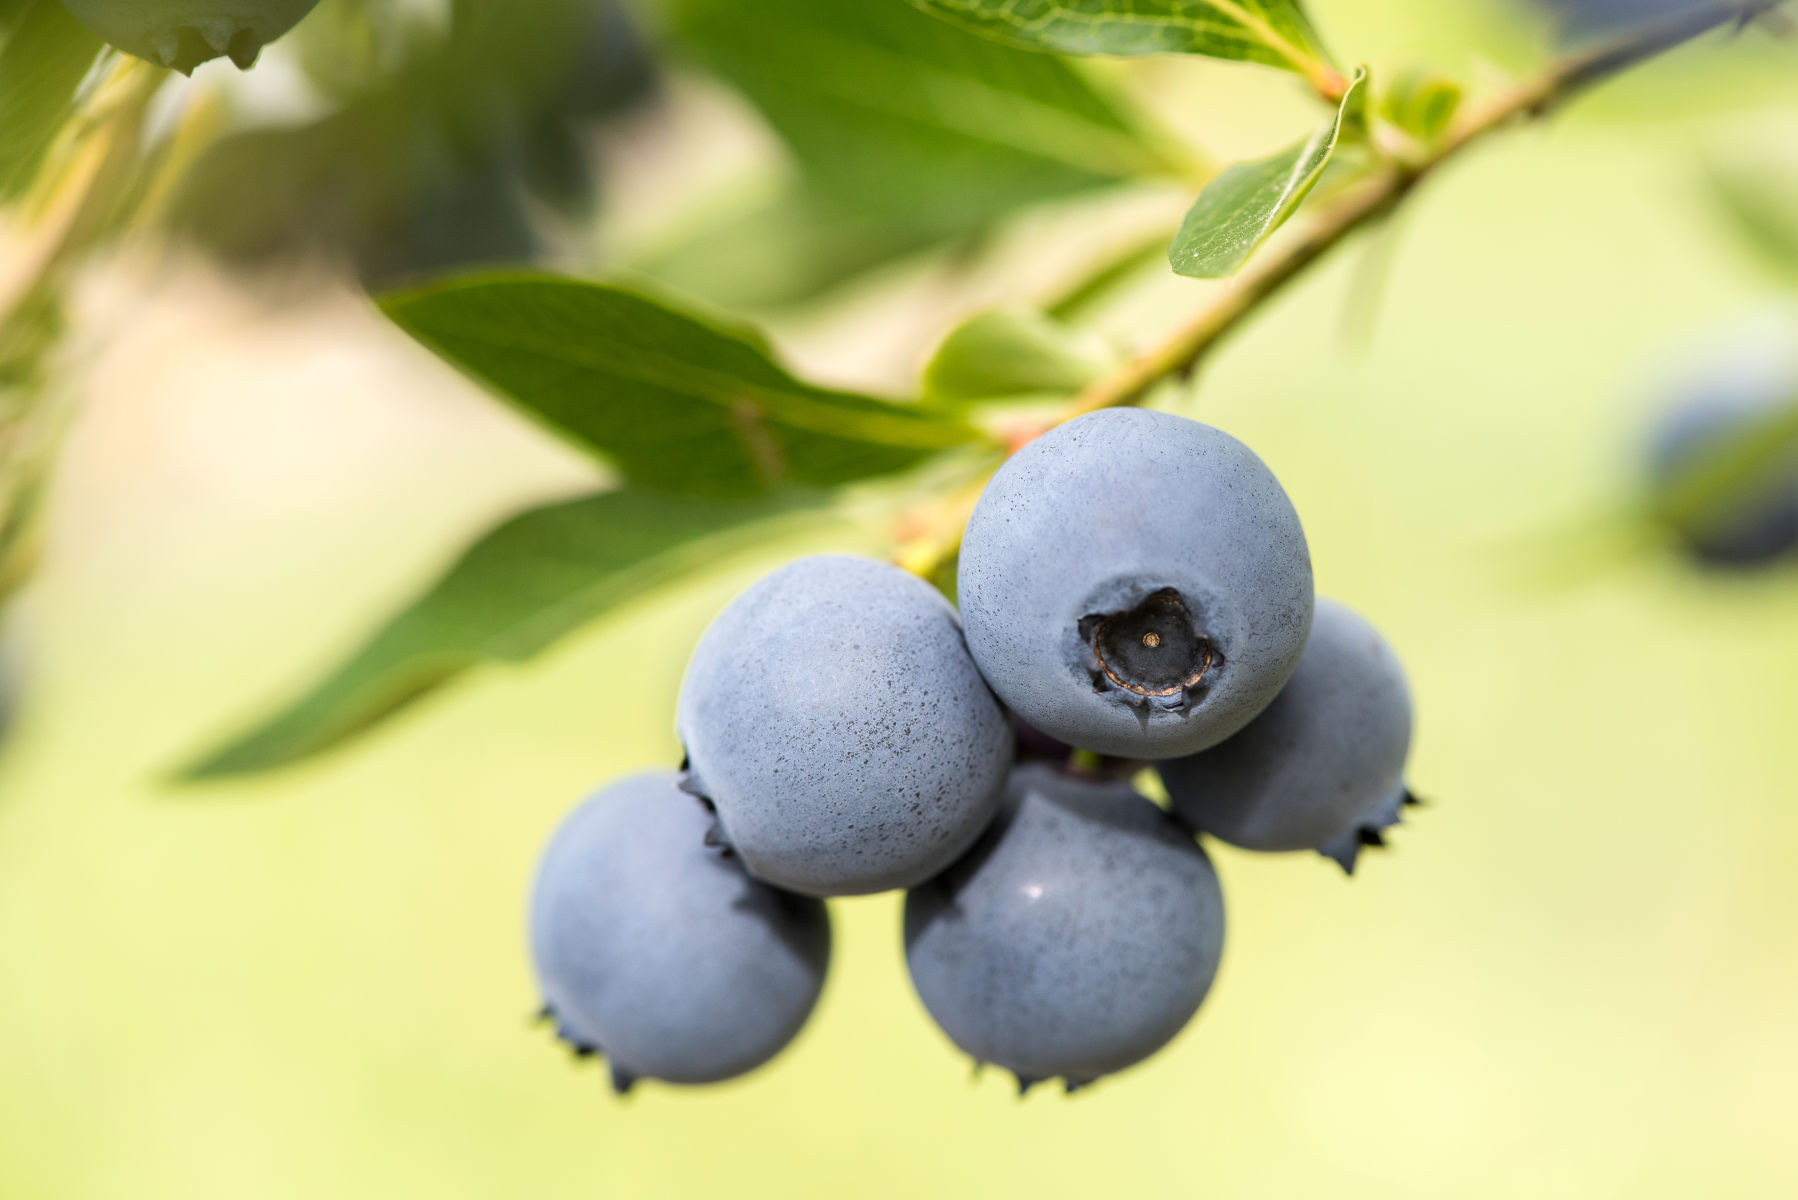 New blueberries now available for New Zealand growers